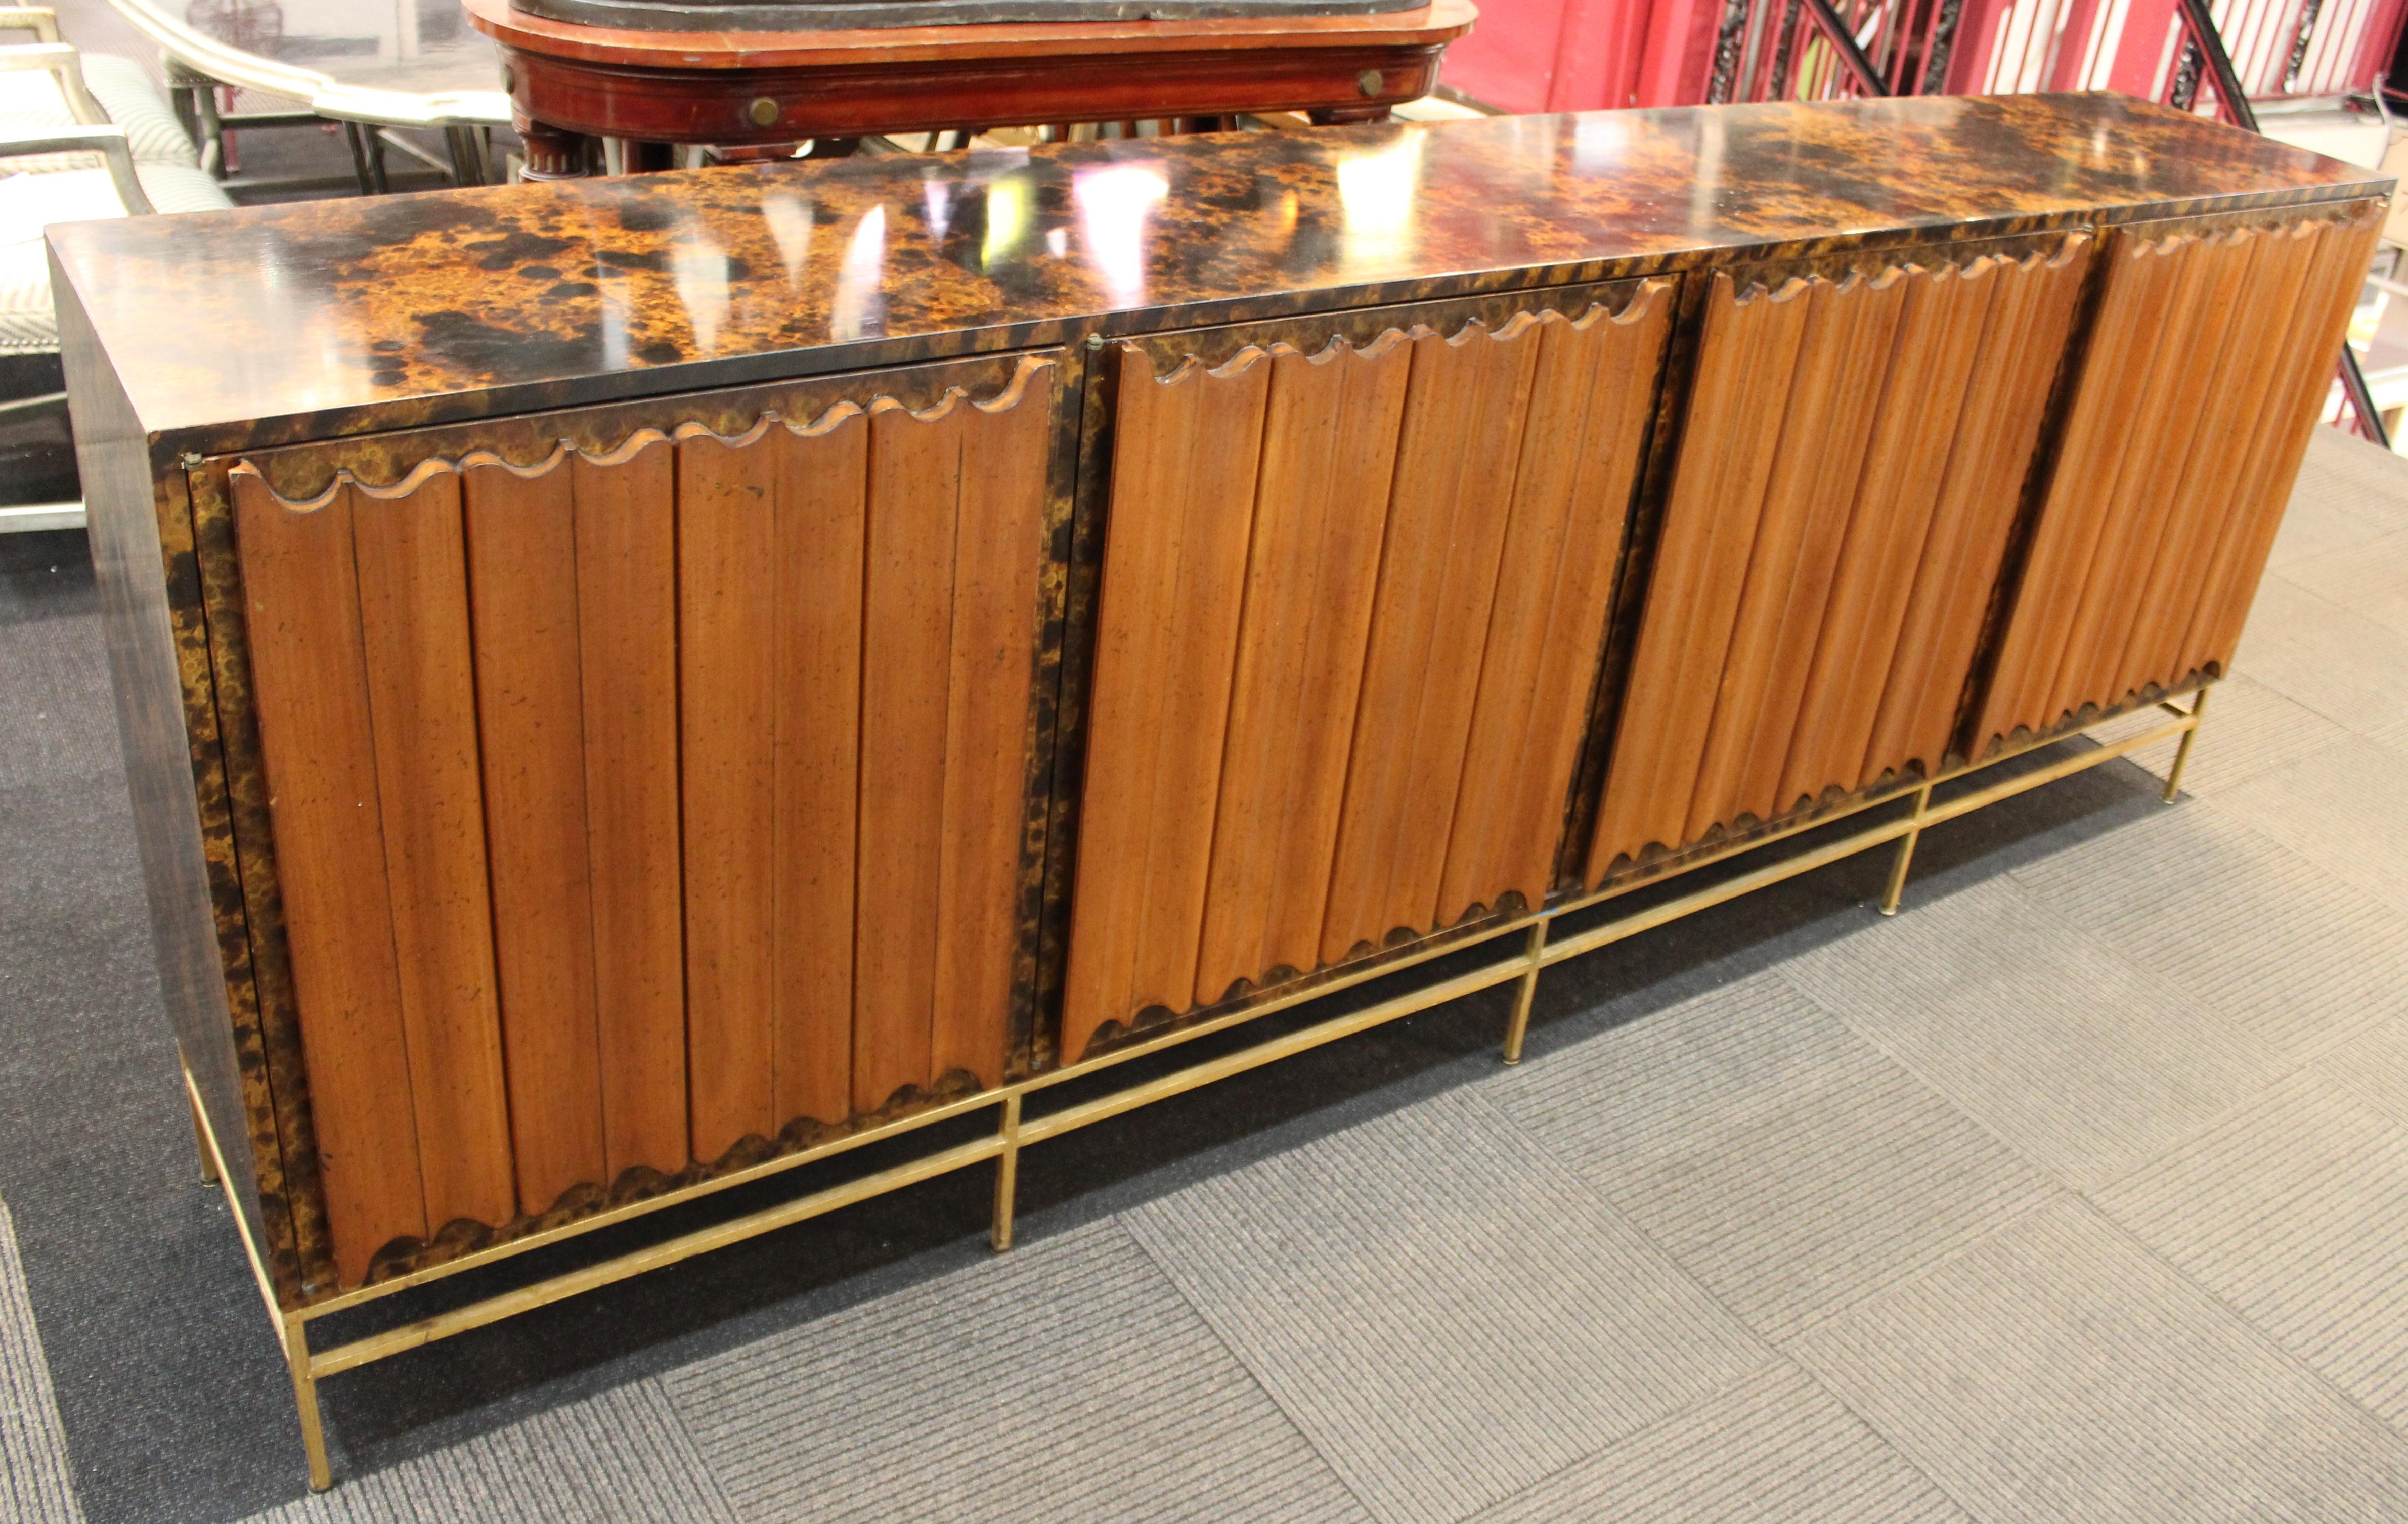 Monumental American Mid-Century Modern credenza or sideboard in the style of Harvey Probber, with tortoiseshell finish and four linen-fold style front panel doors atop a gilt metal frame. The piece dates from the mid-20th century and is in great